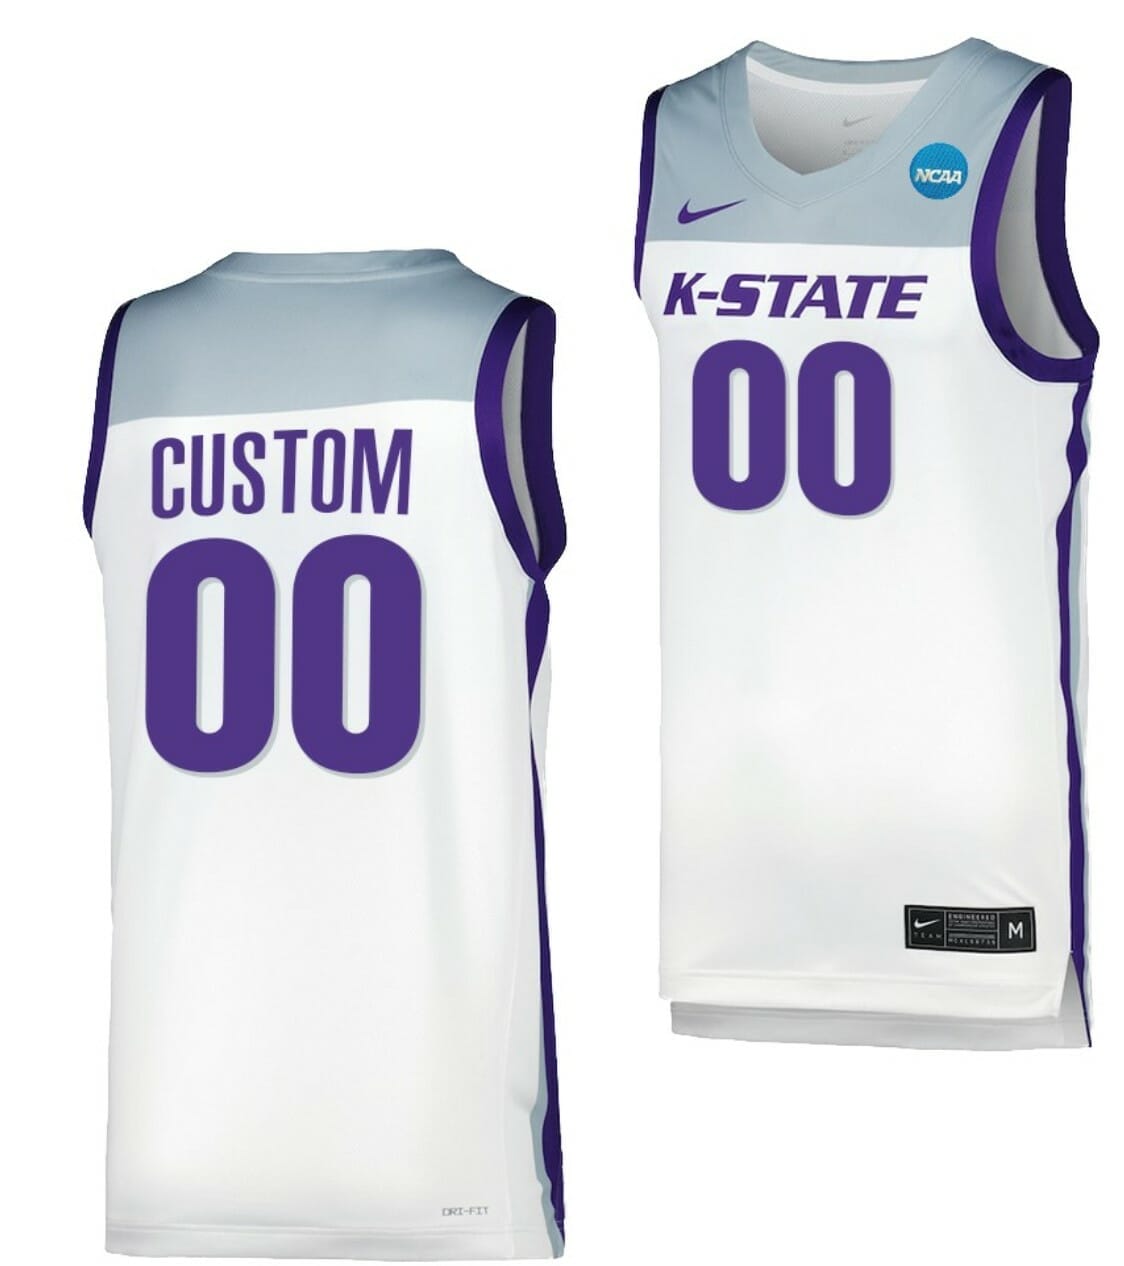 BASKETBALL MEMPHIS 15 JERSEY FREE CUSTOMIZE OF NAME AND NUMBER